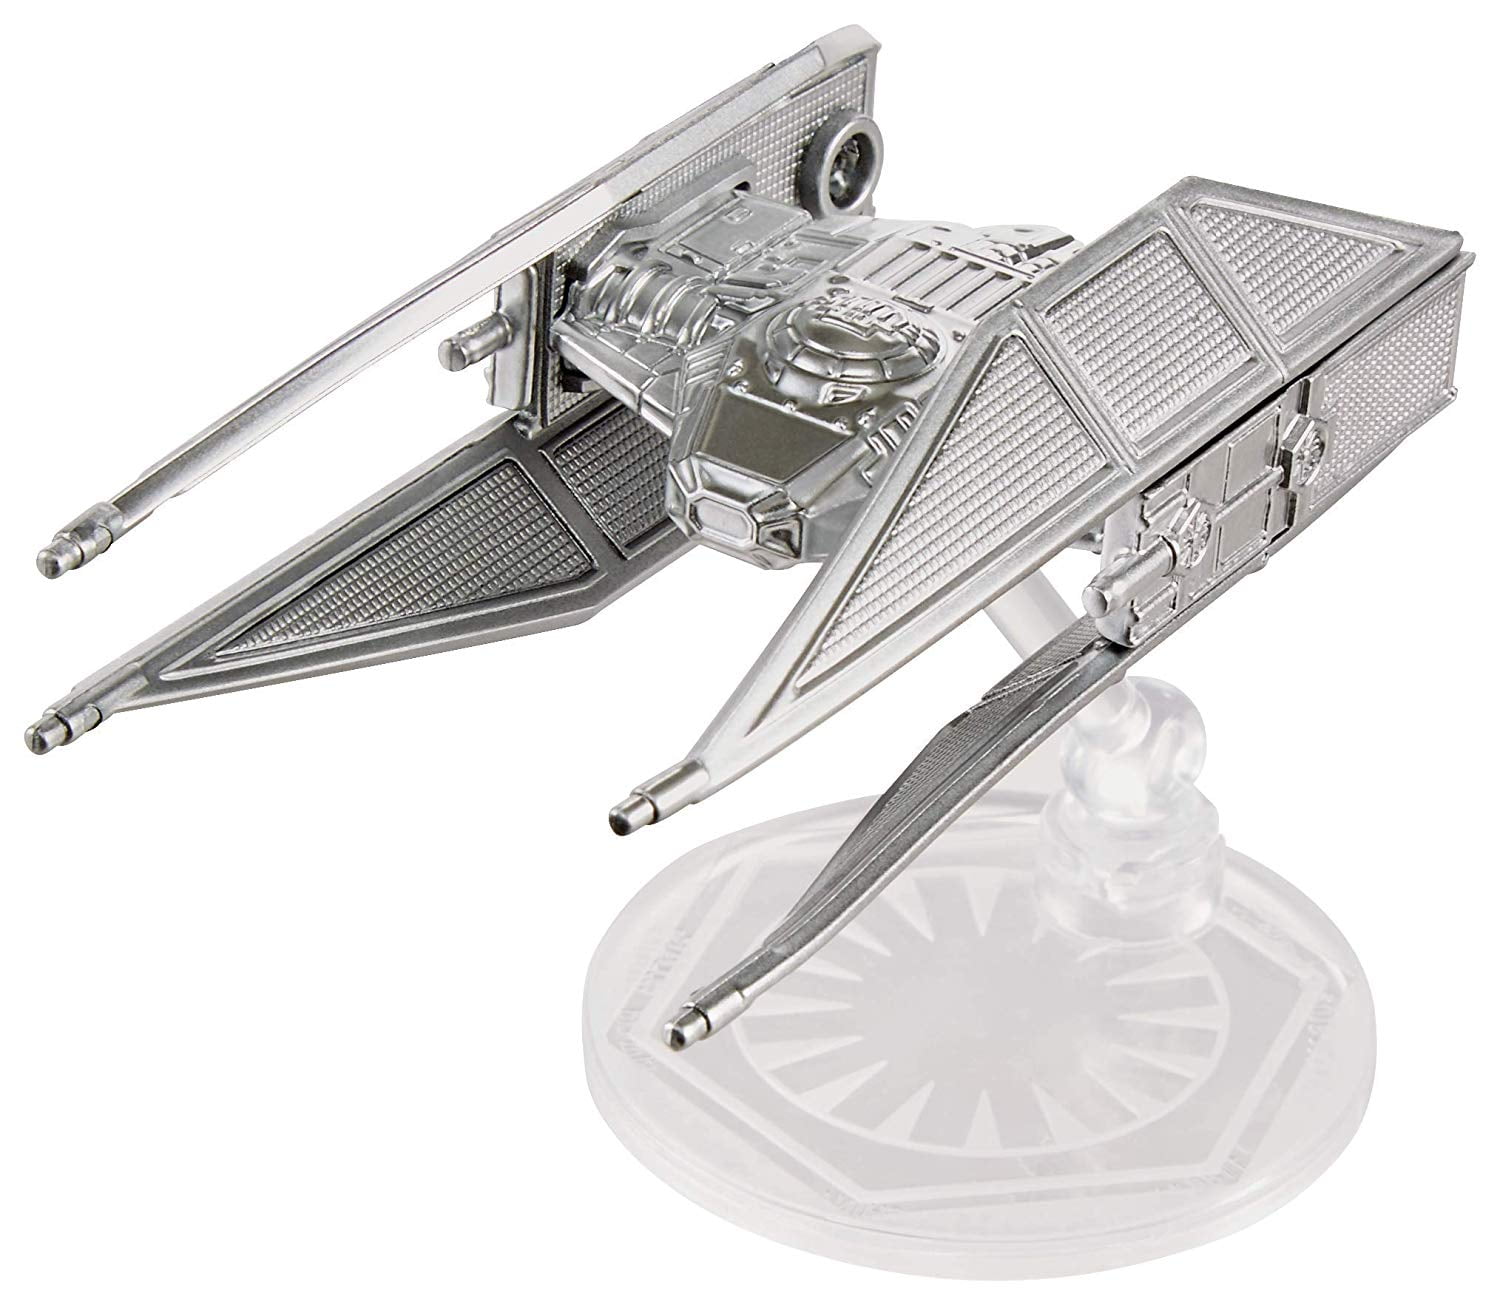 Details about   TIE Fighter Hot Wheels Star Wars Commemorative Starships 2019 